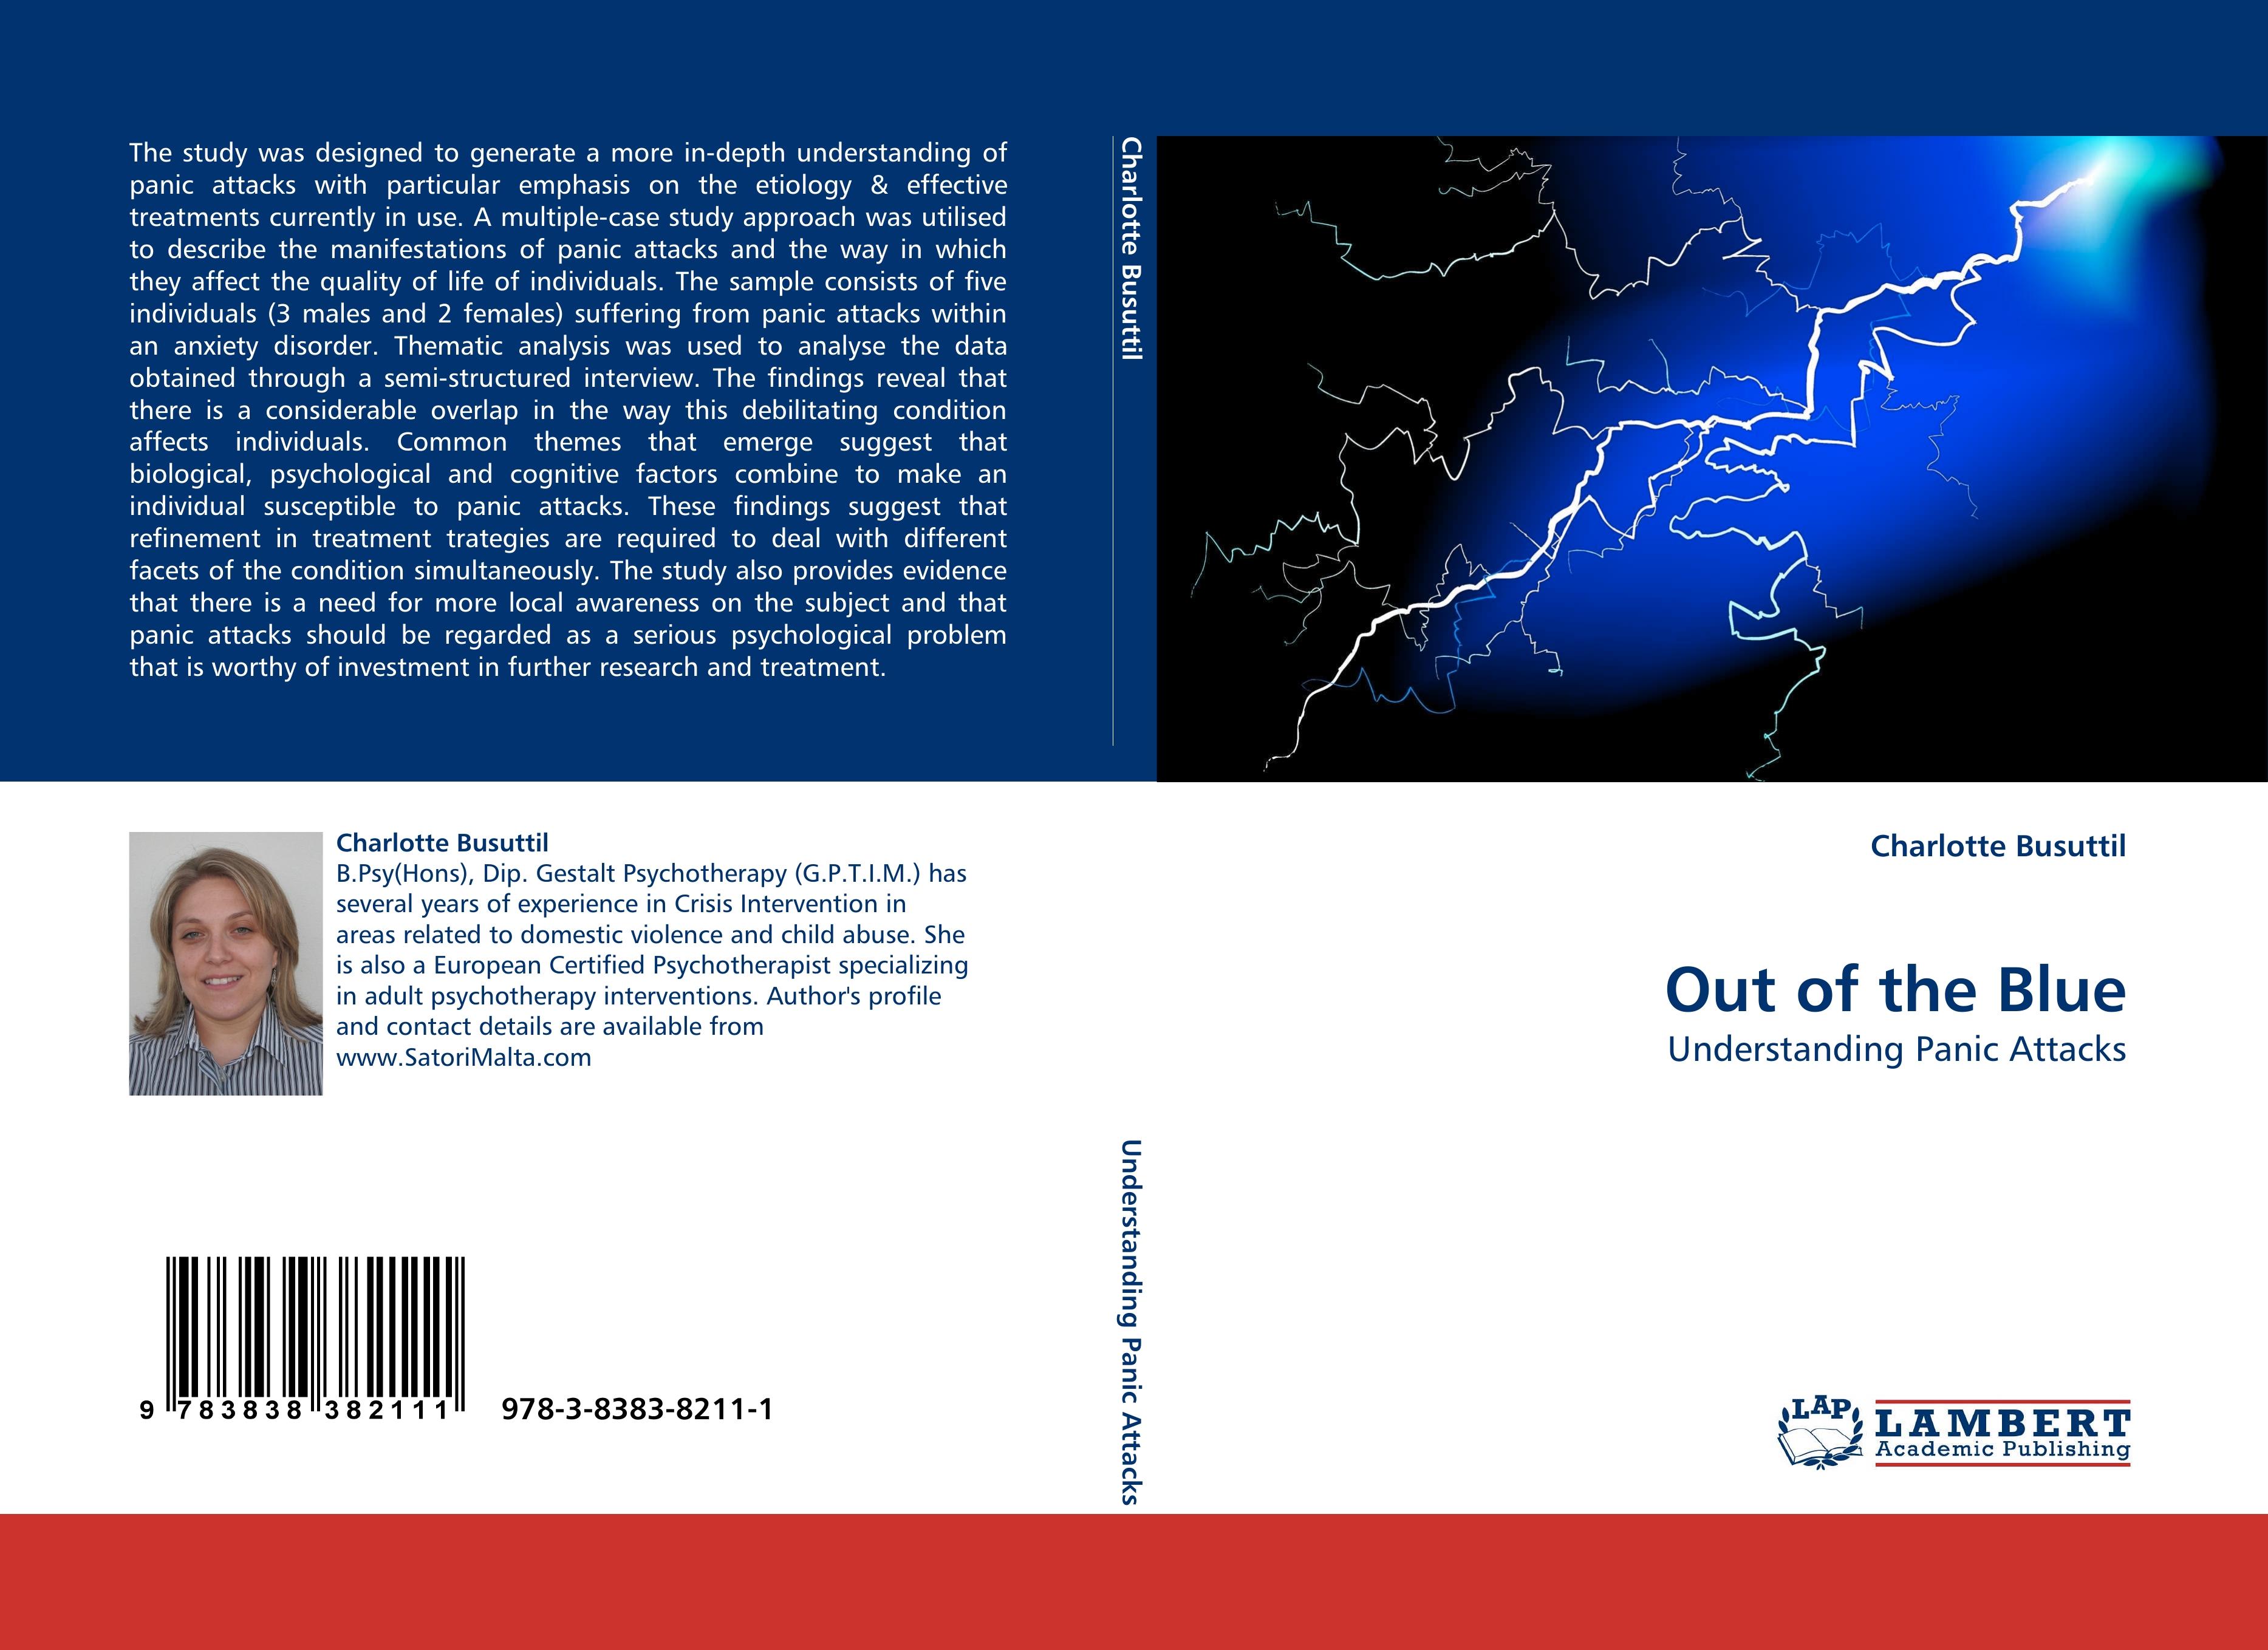 Out of the Blue - Charlotte Busuttil